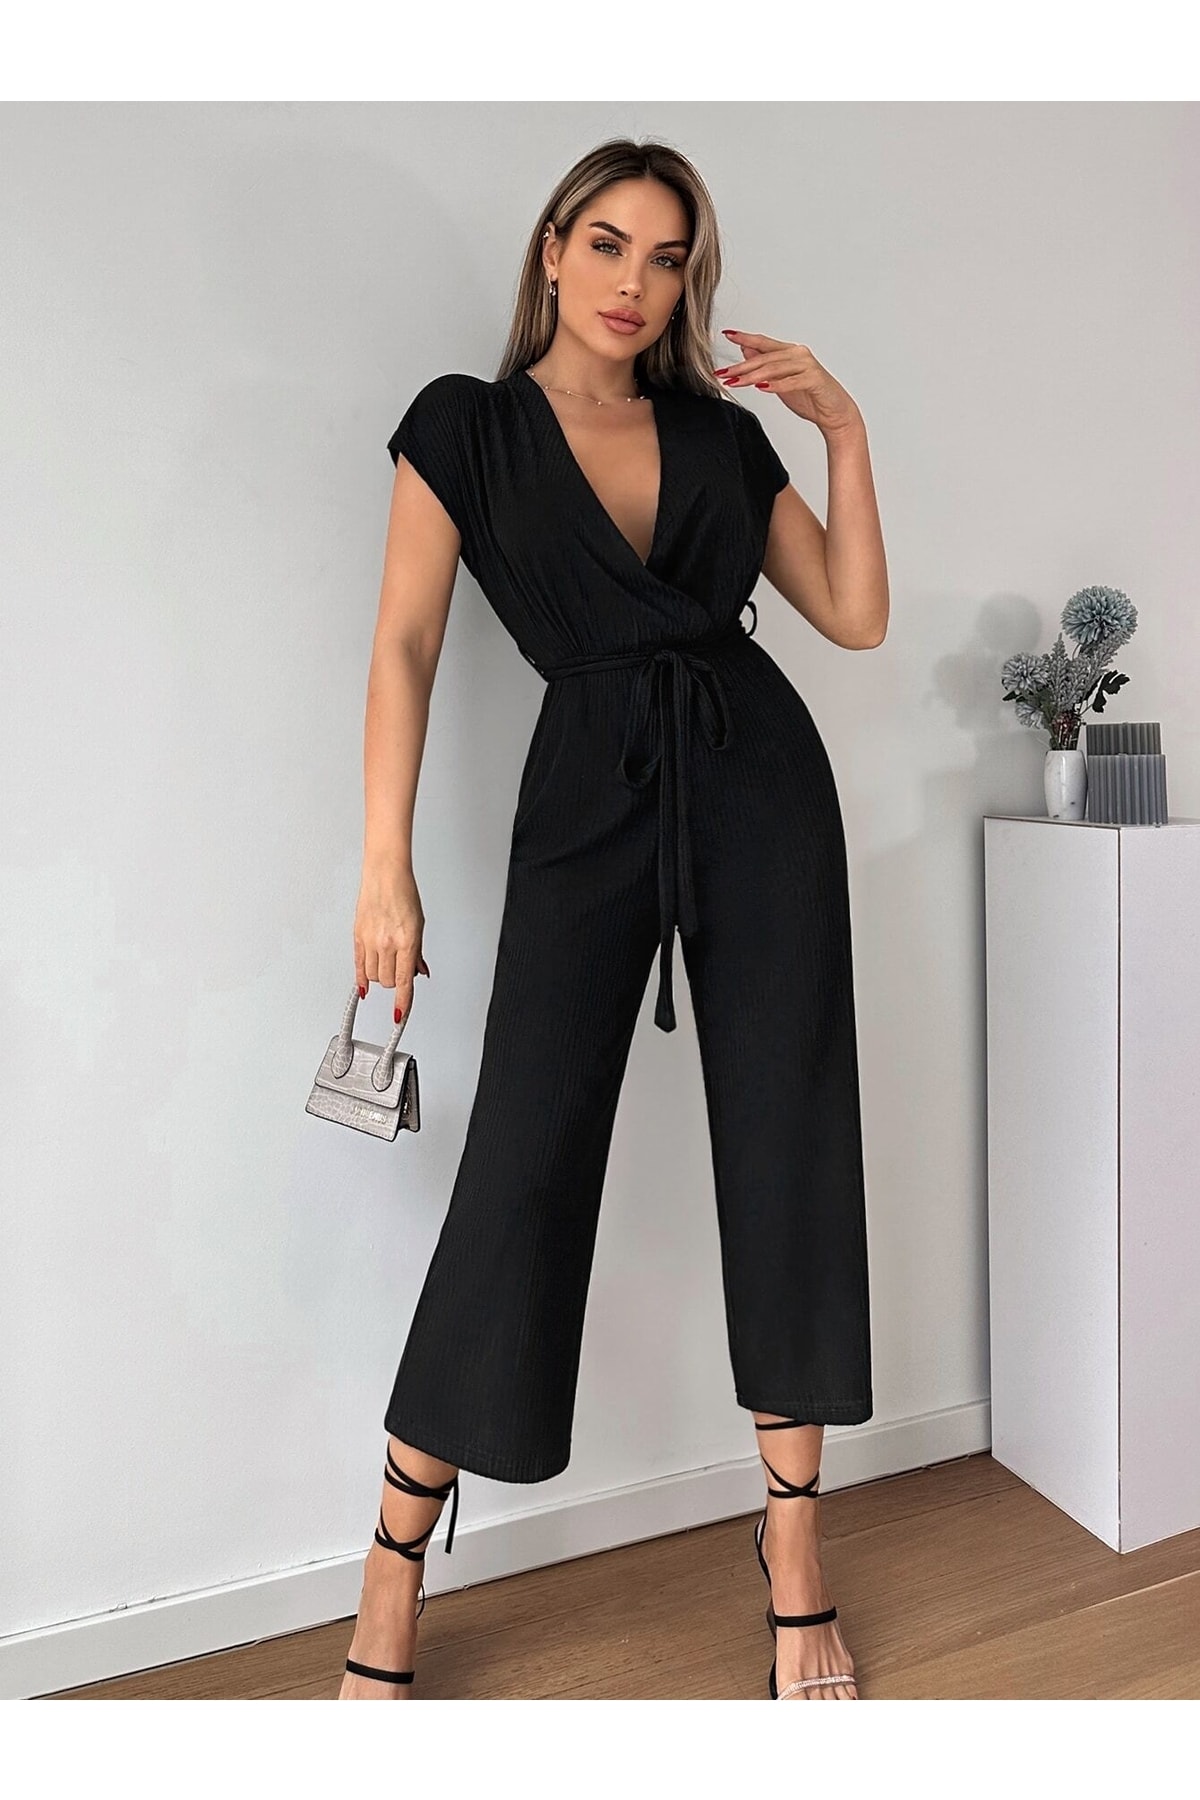 armonika Women's Black Double Breasted Overalls With Belted Waist